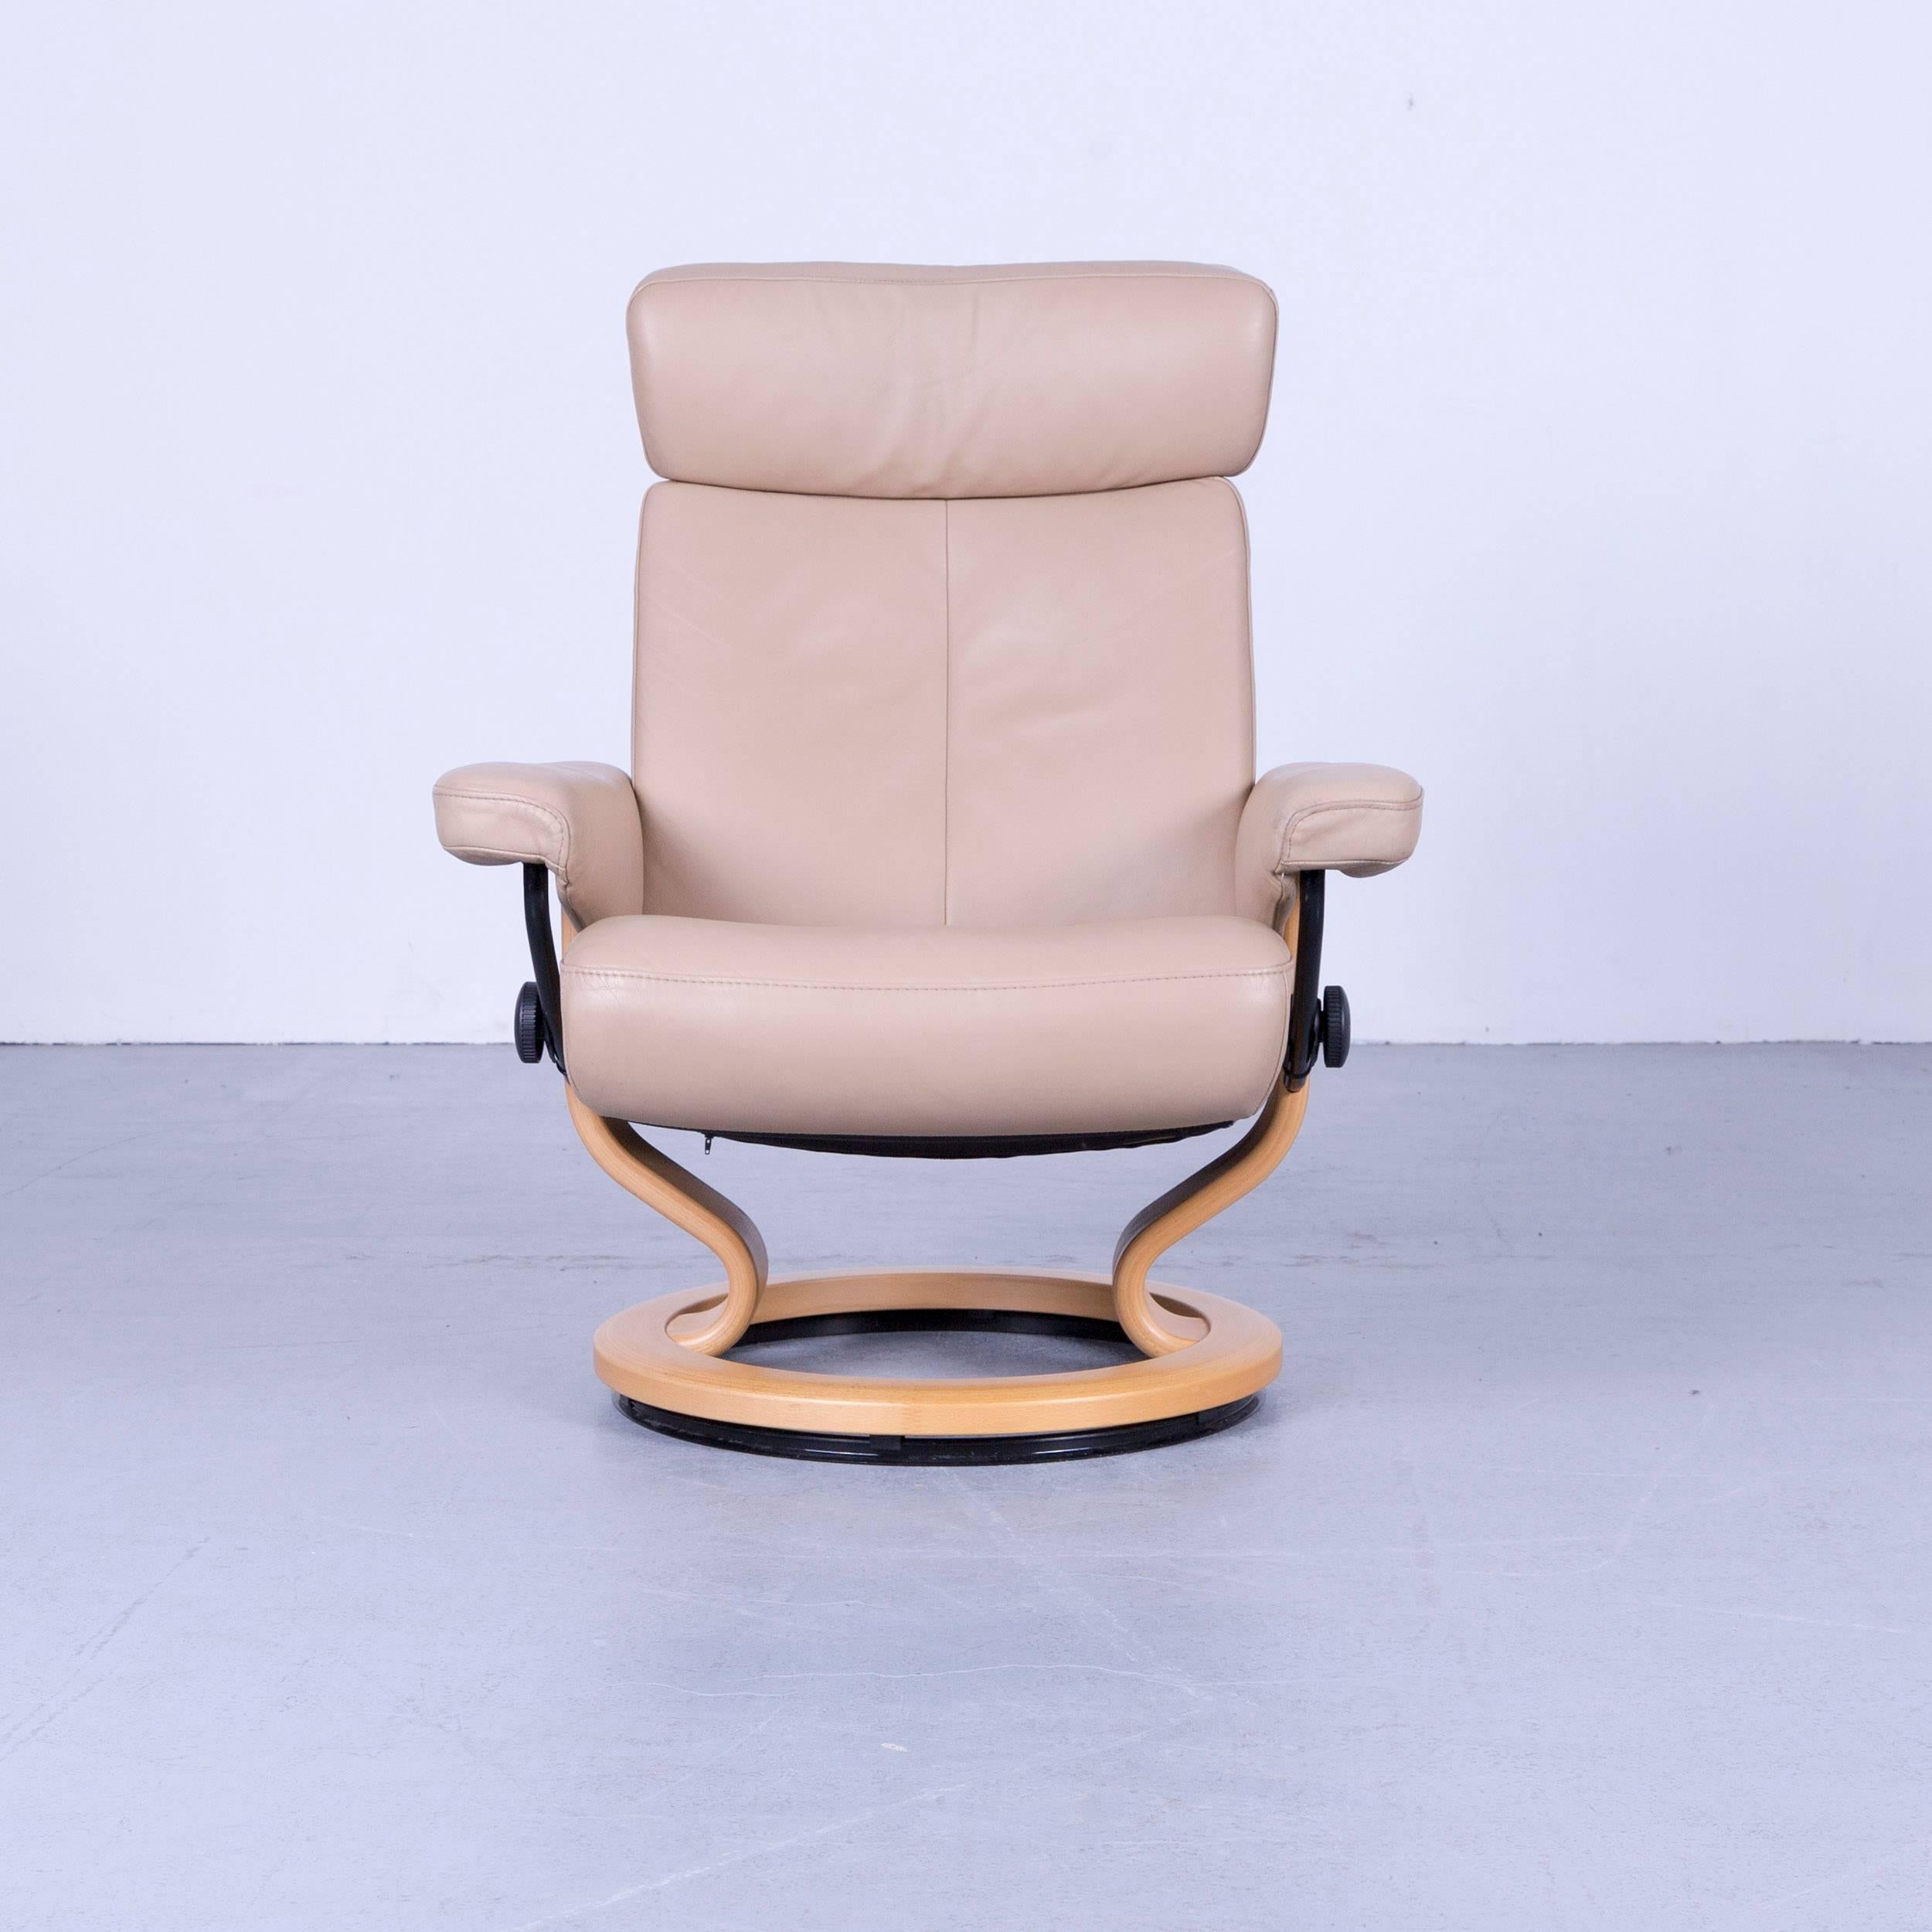 Ekornes Stressless Orion Armchair Beige Leather Modern Recliner Chair Designer In Good Condition For Sale In Cologne, DE